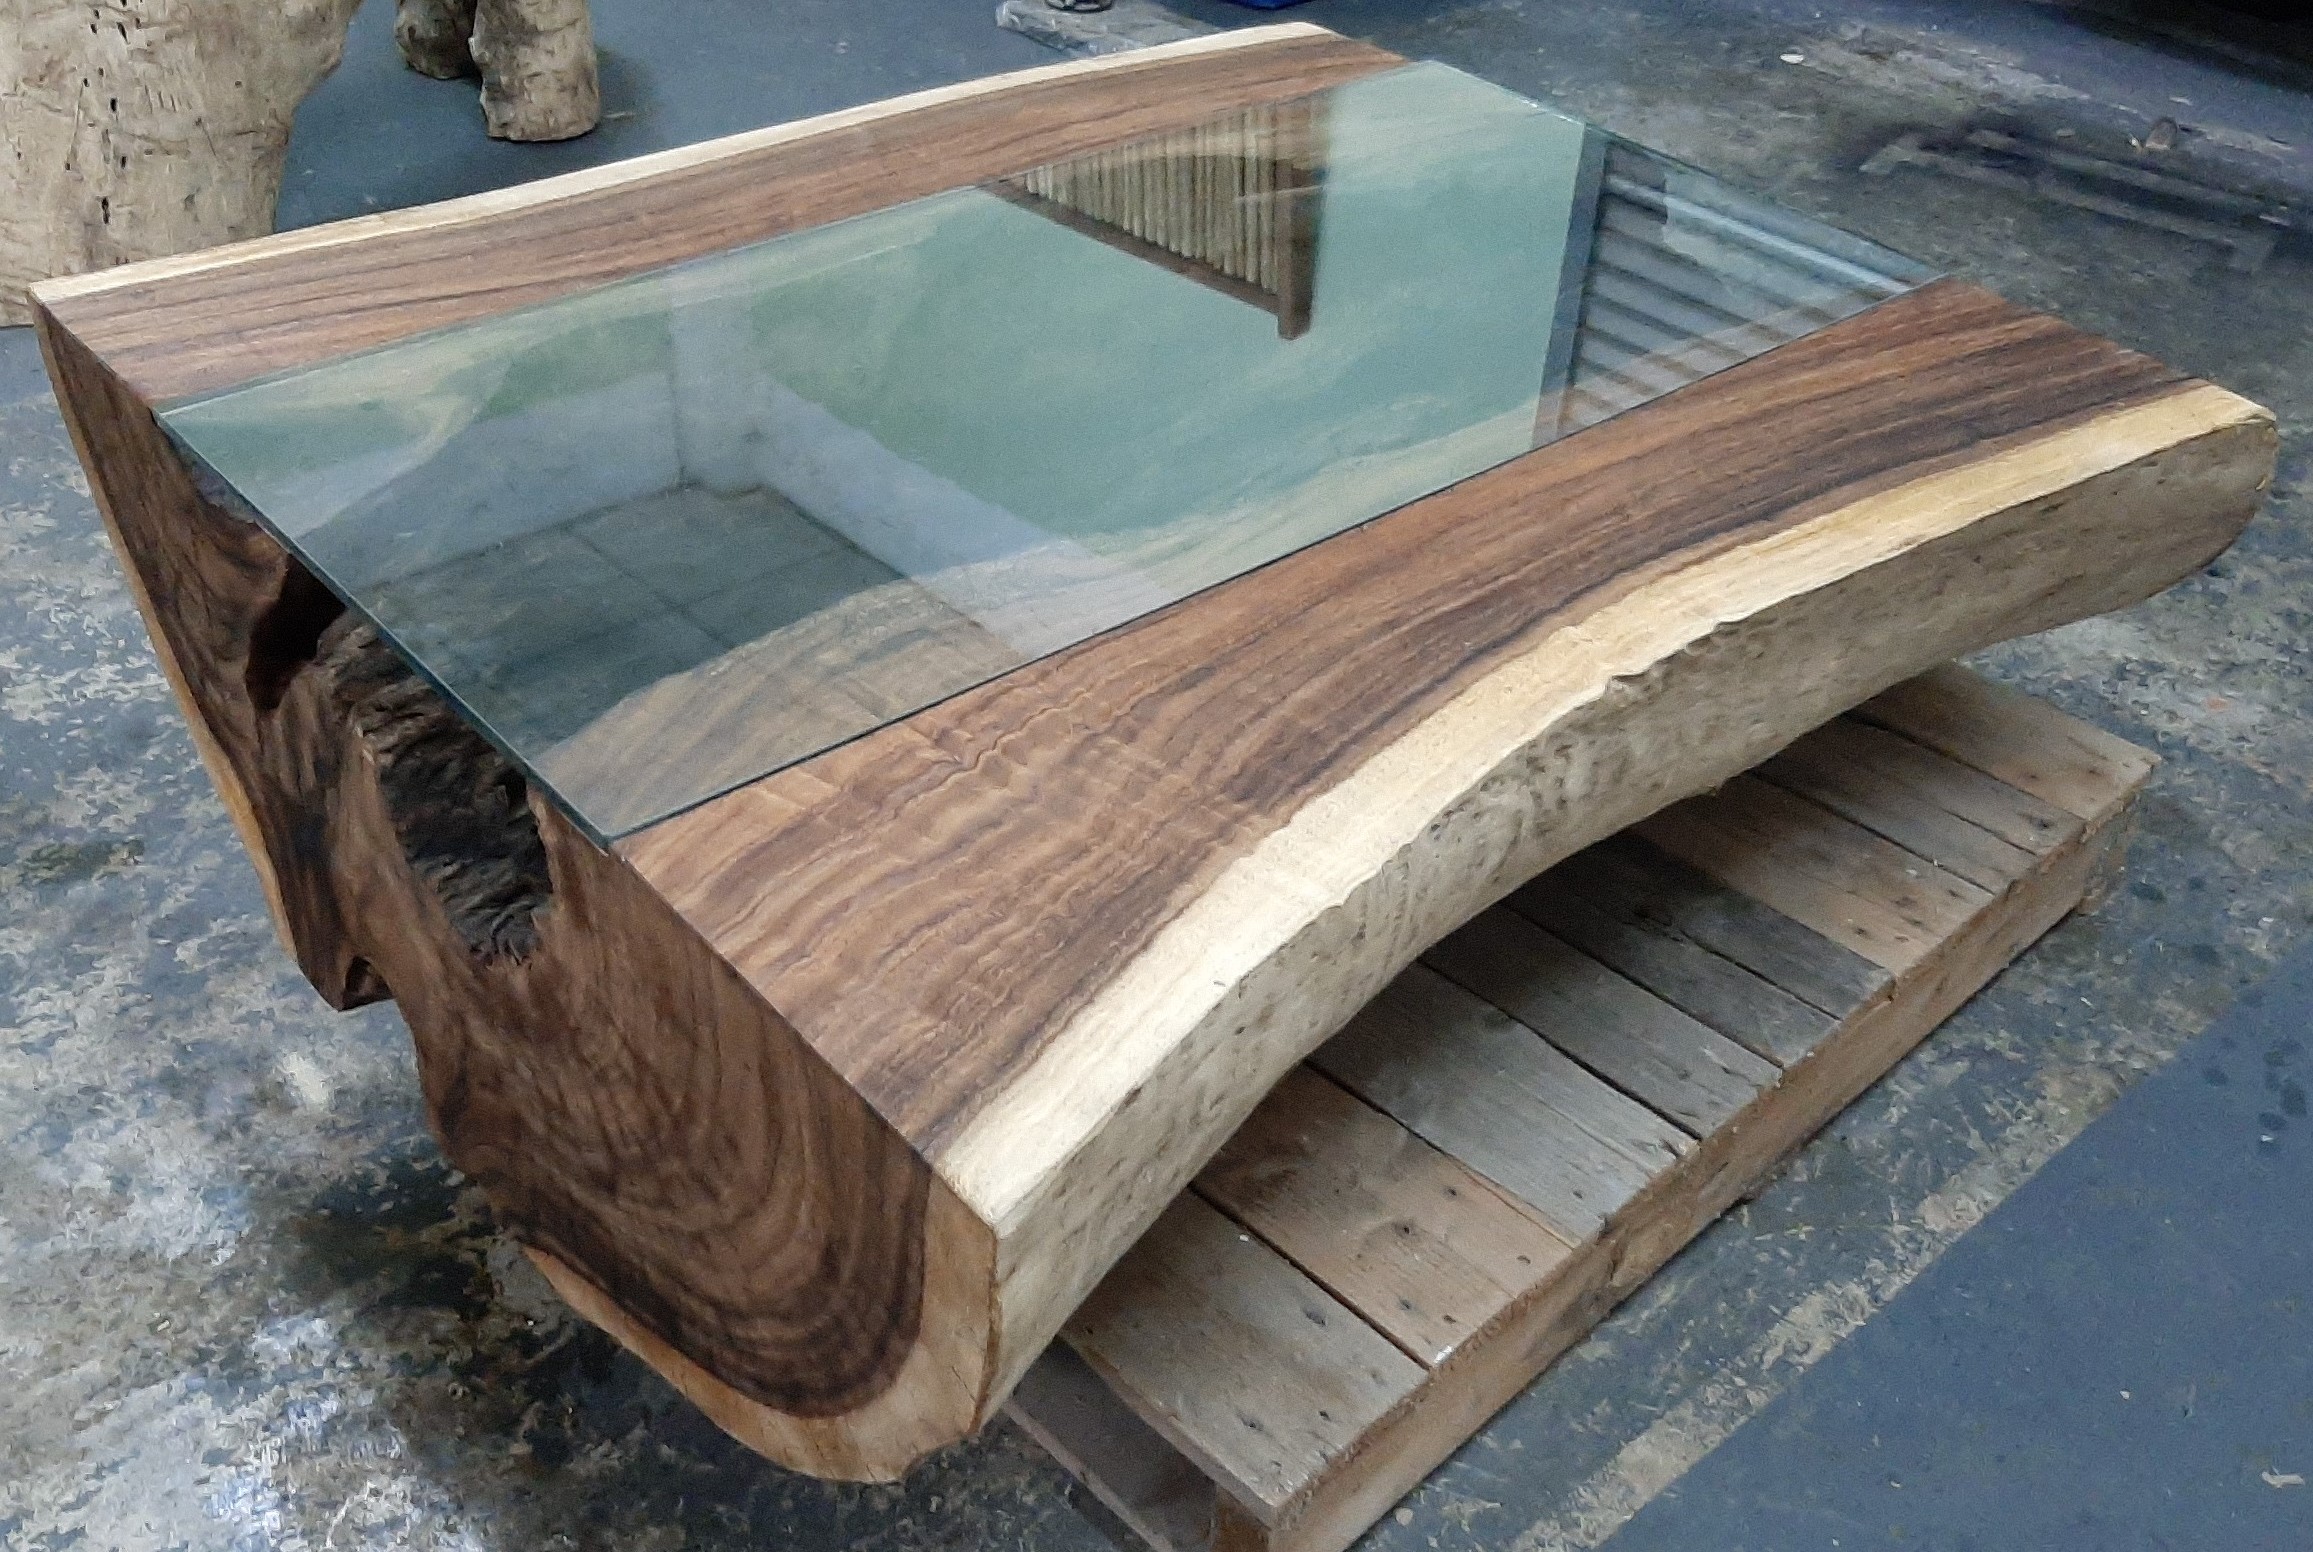 Half a tree trunk, Luxurious, Heavy table, Thick glass inlay, Living room table, Very heavy table